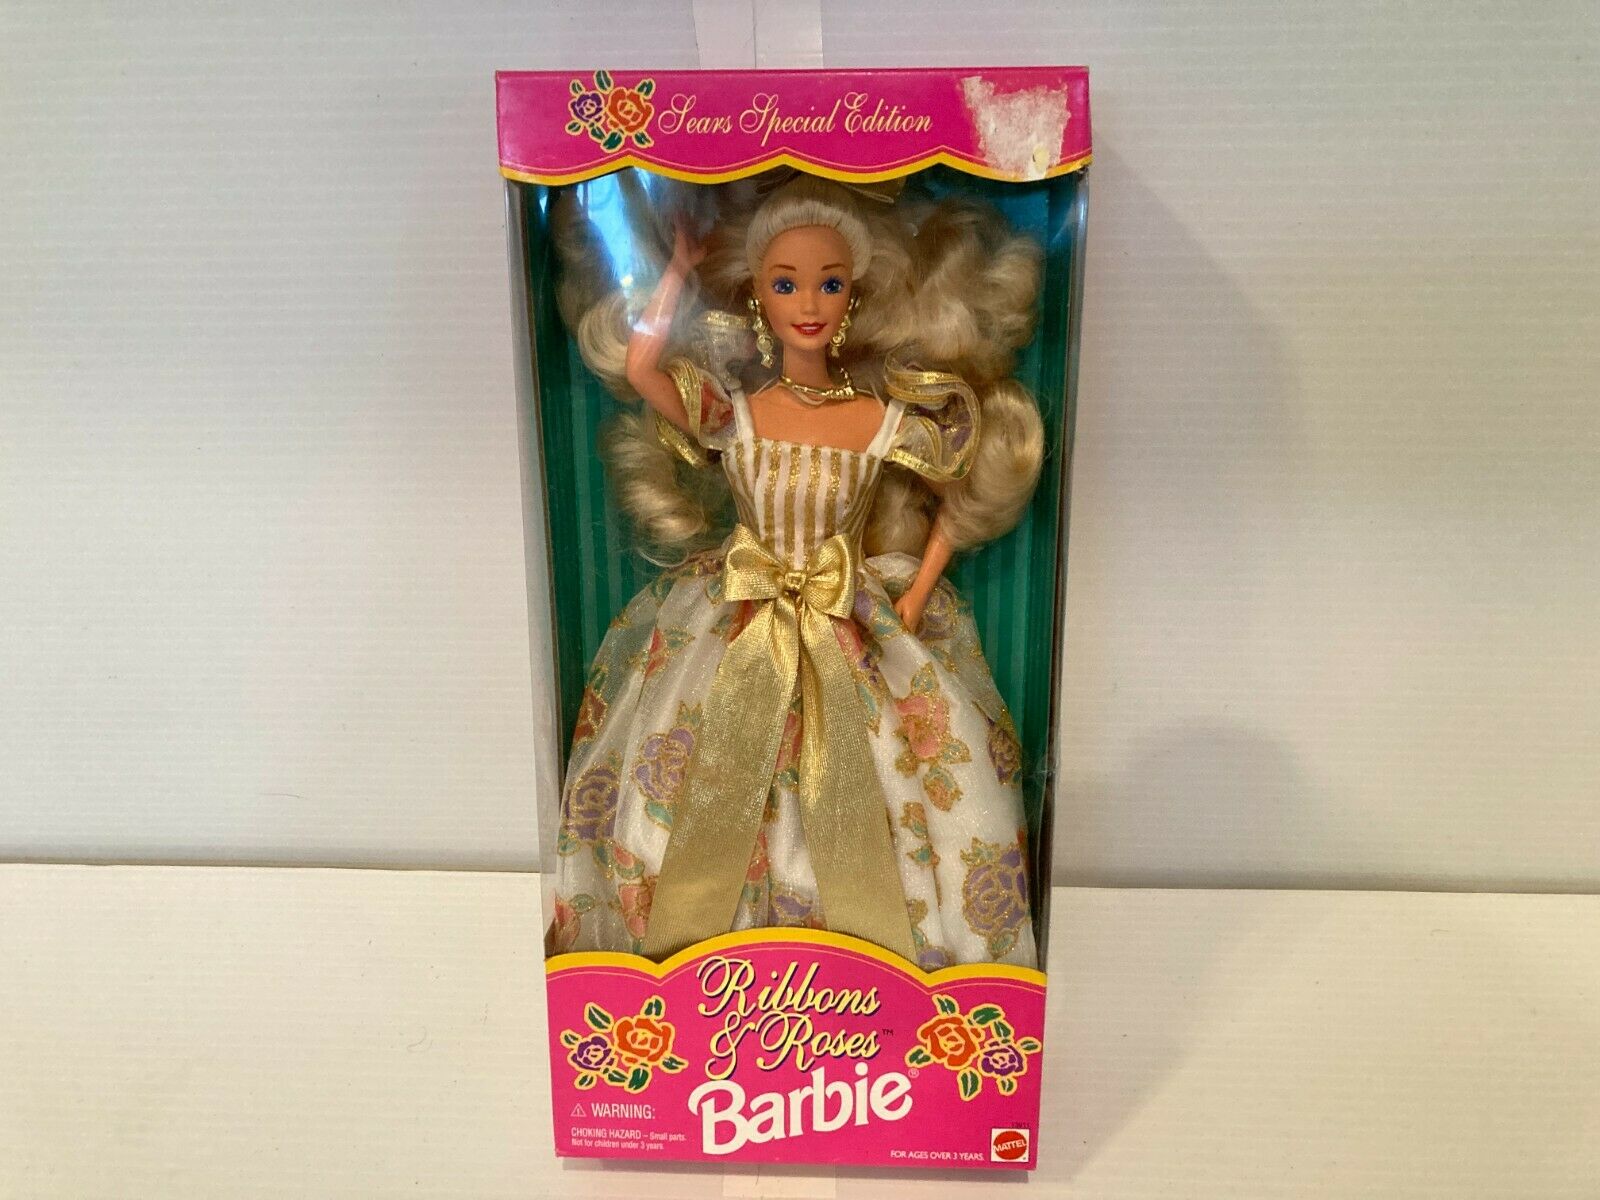 Mattel Ribbons Of Roses Barbie Doll - Sears Special Edition New!